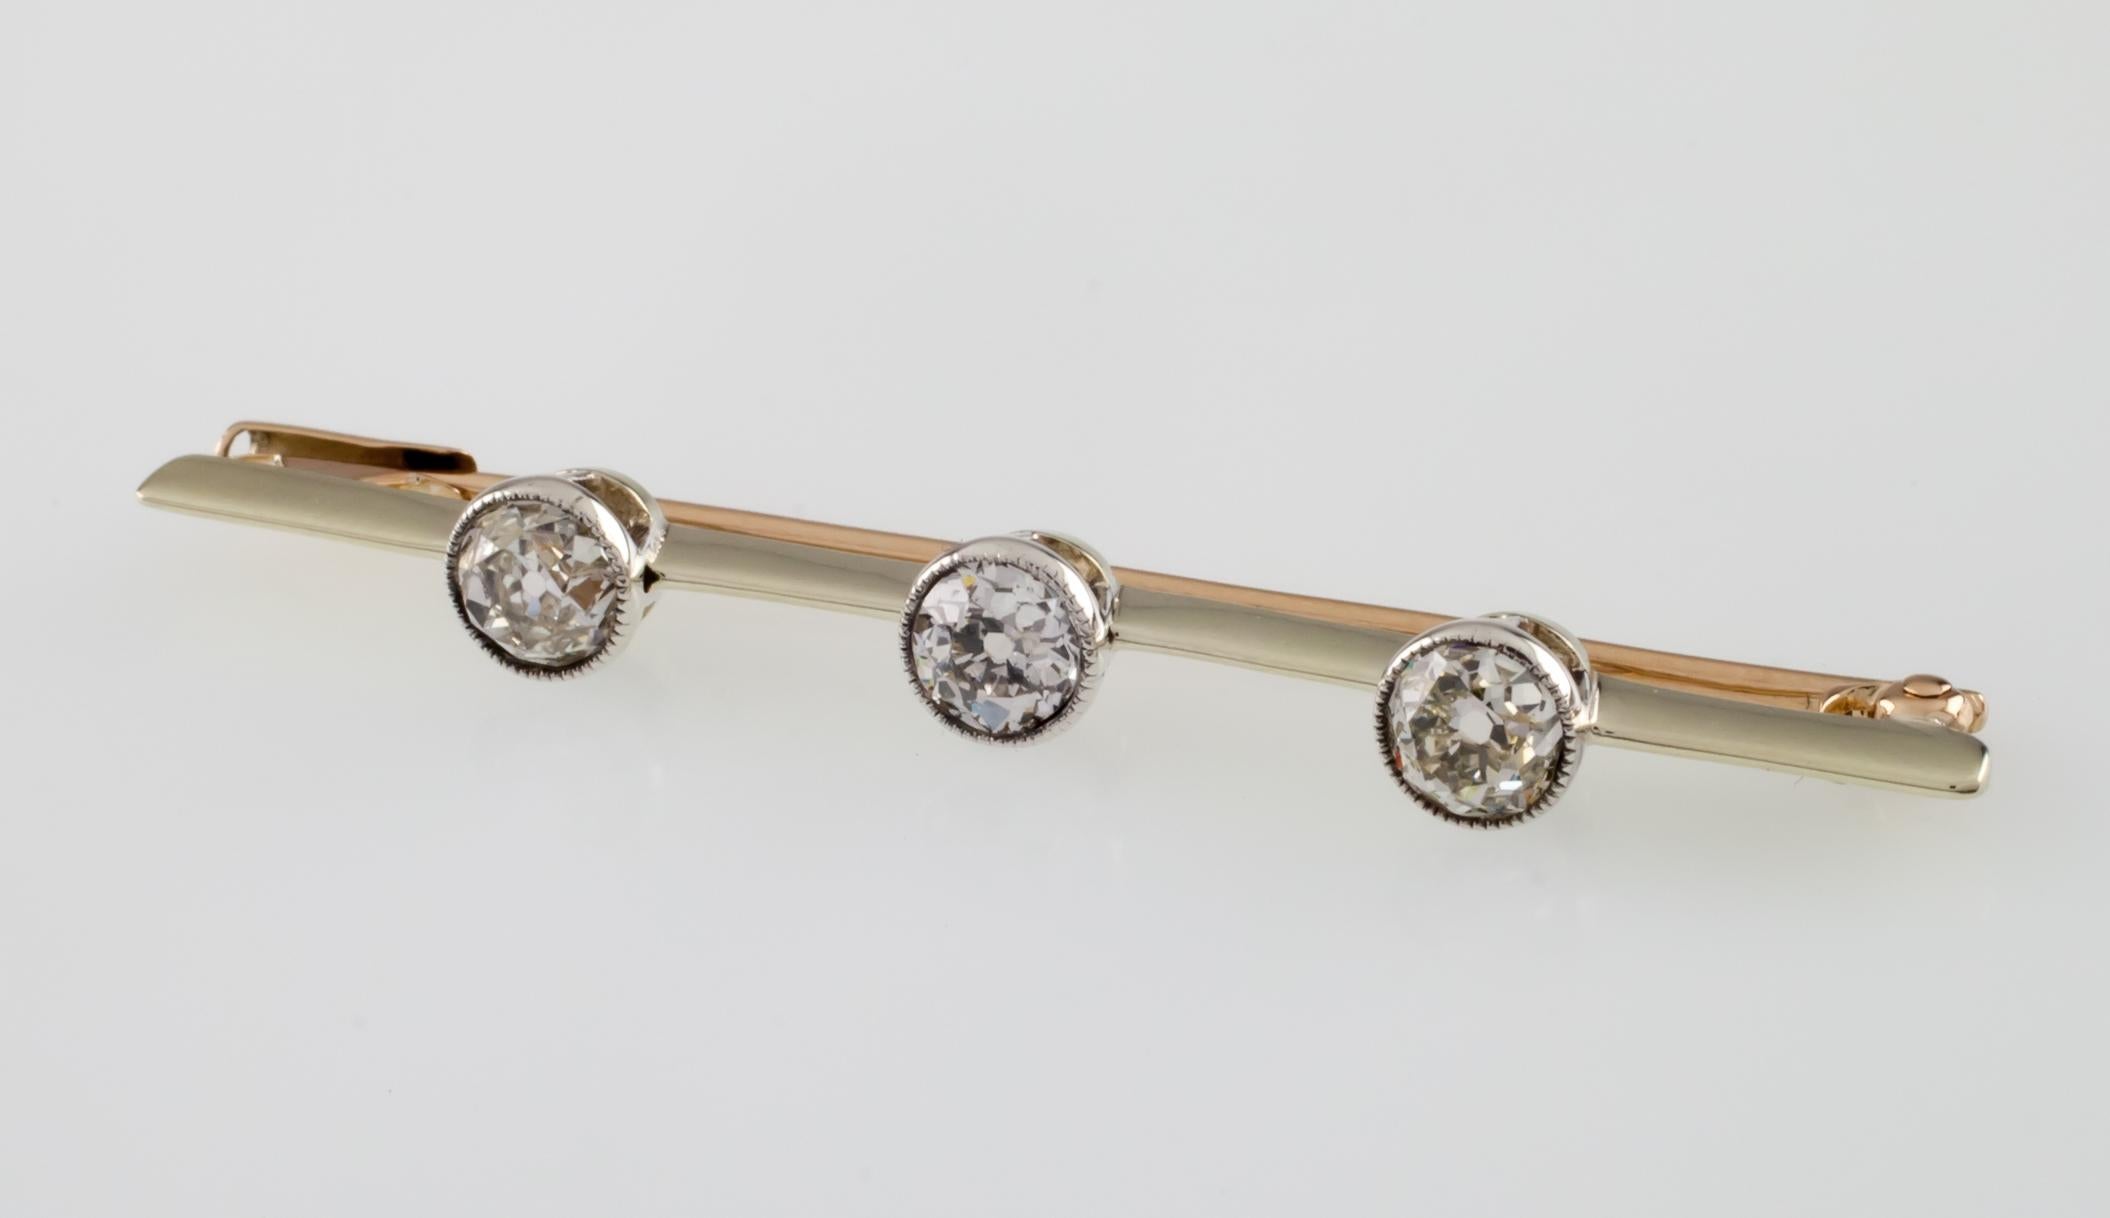 Gorgeous Gold Brooch
Features Three Bezel-Set Old Miner's Cut Diamonds
Total Diamond Weight = 0.75 ct
Total Length of Brooch = 48 mm
Total Mass = 2.9 grams
Gorgeous, Elegant Brooch!